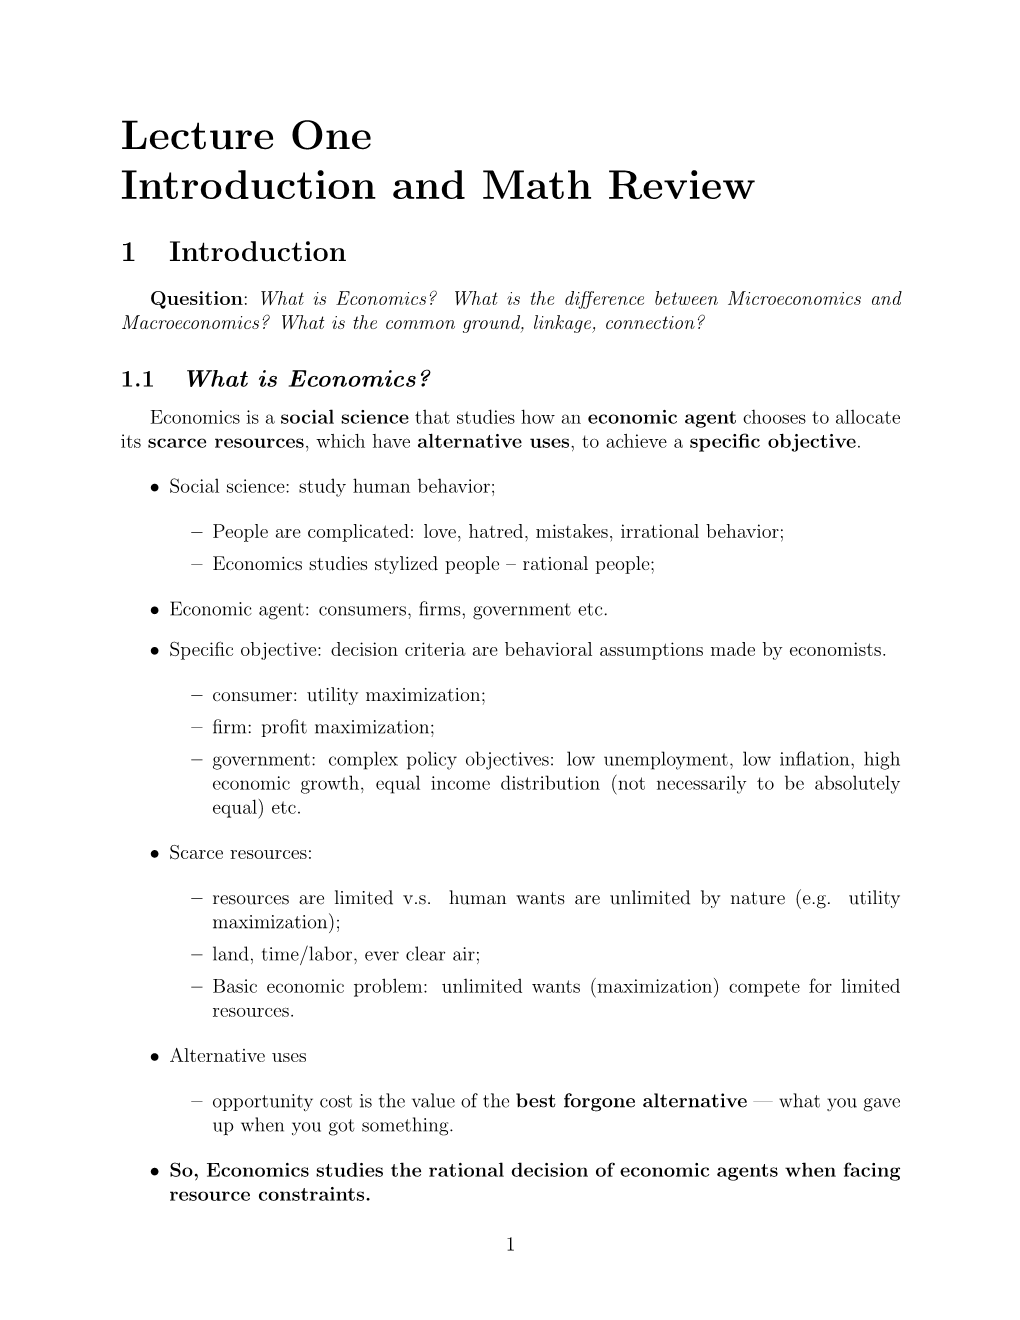 Lecture One Introduction and Math Review